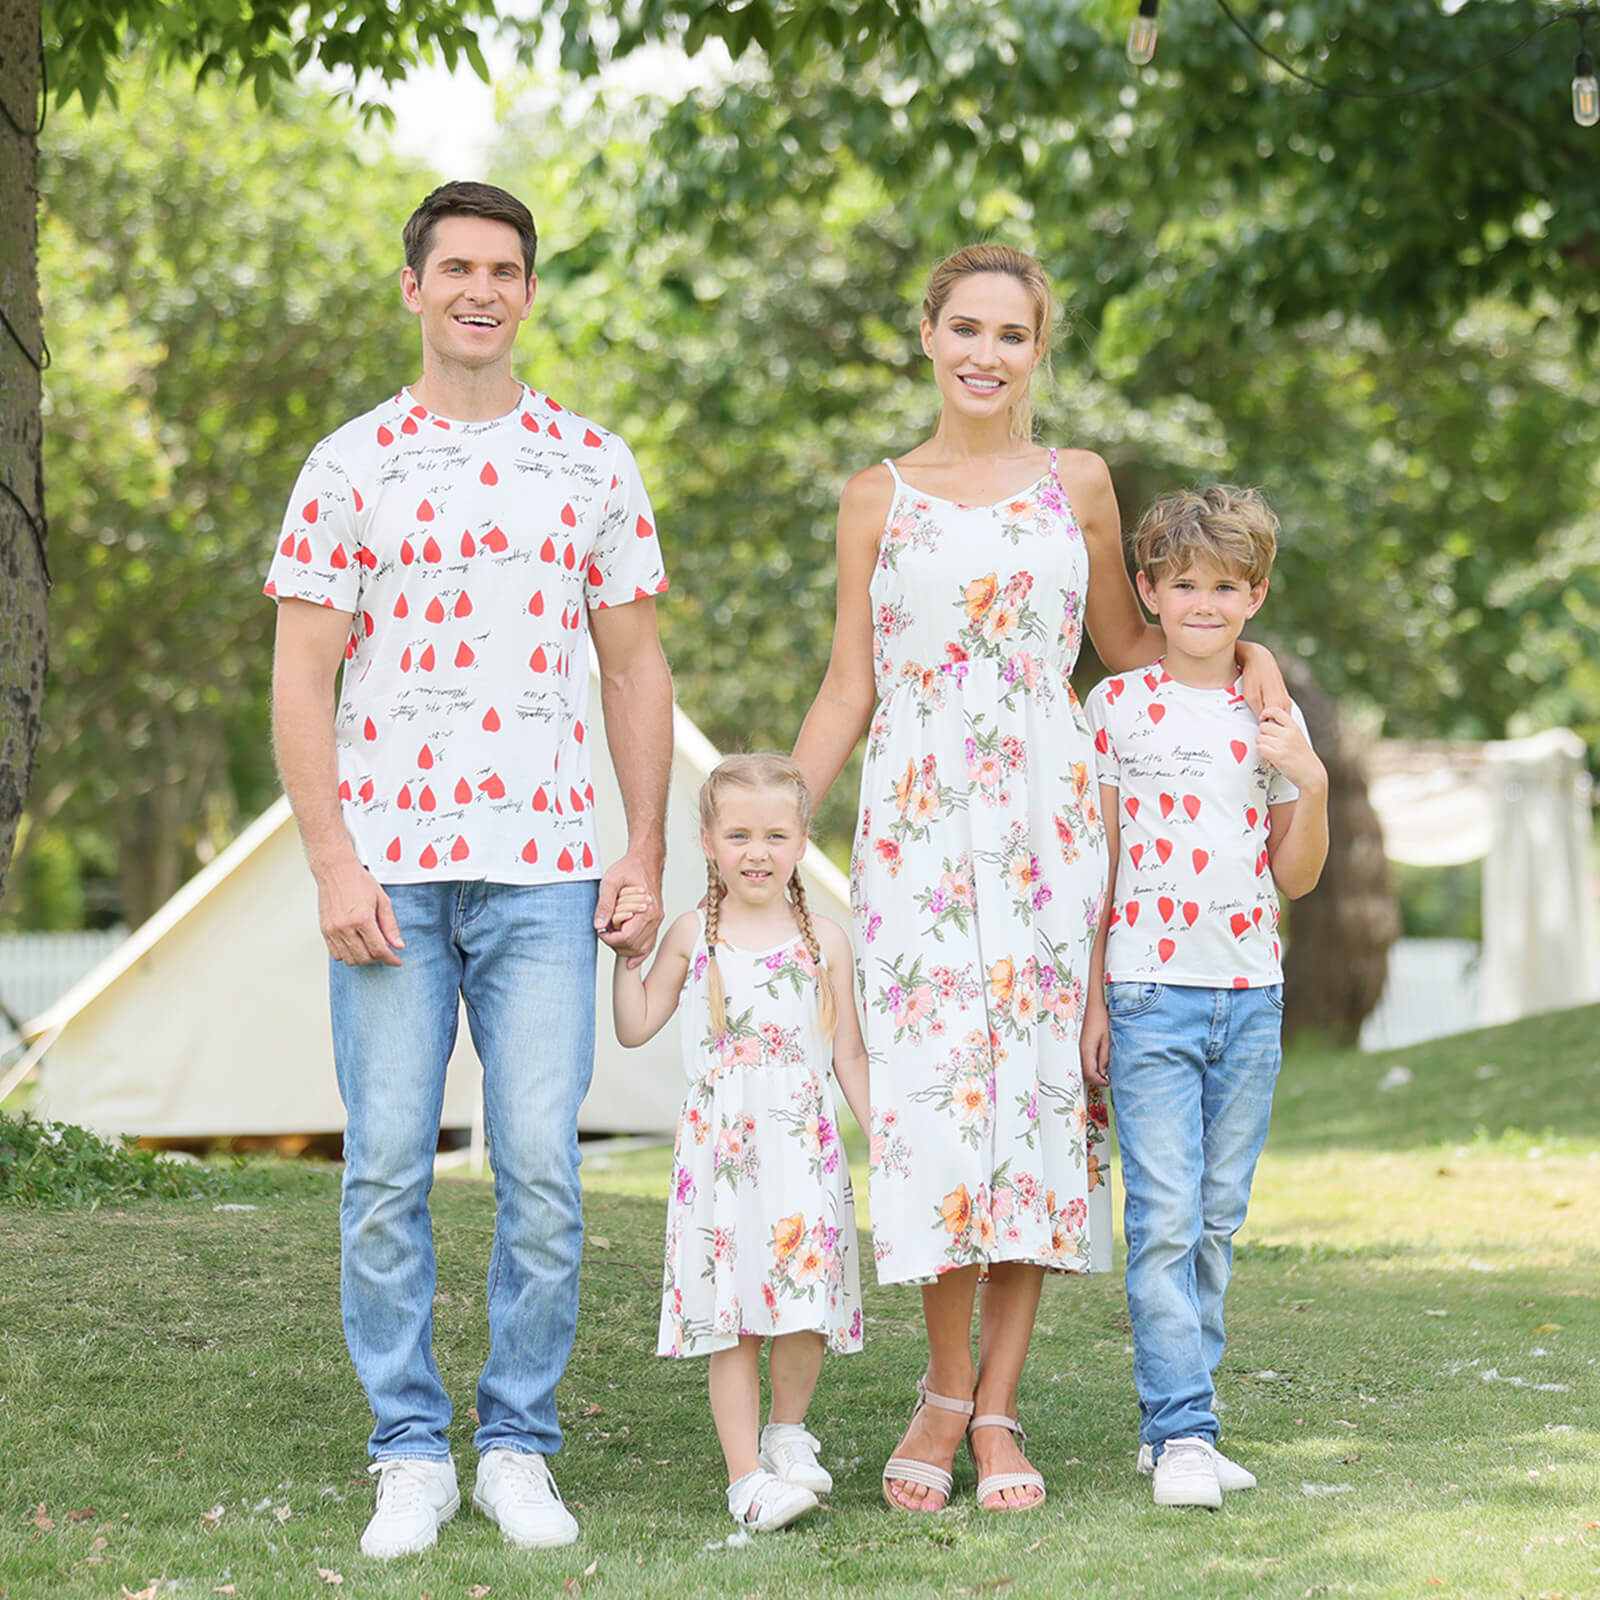 Floral Print Family Matching Tops(Sling Dresses for Mom and Girl-Raglan Sleeves T-shirts for Dad and Boy)TM001